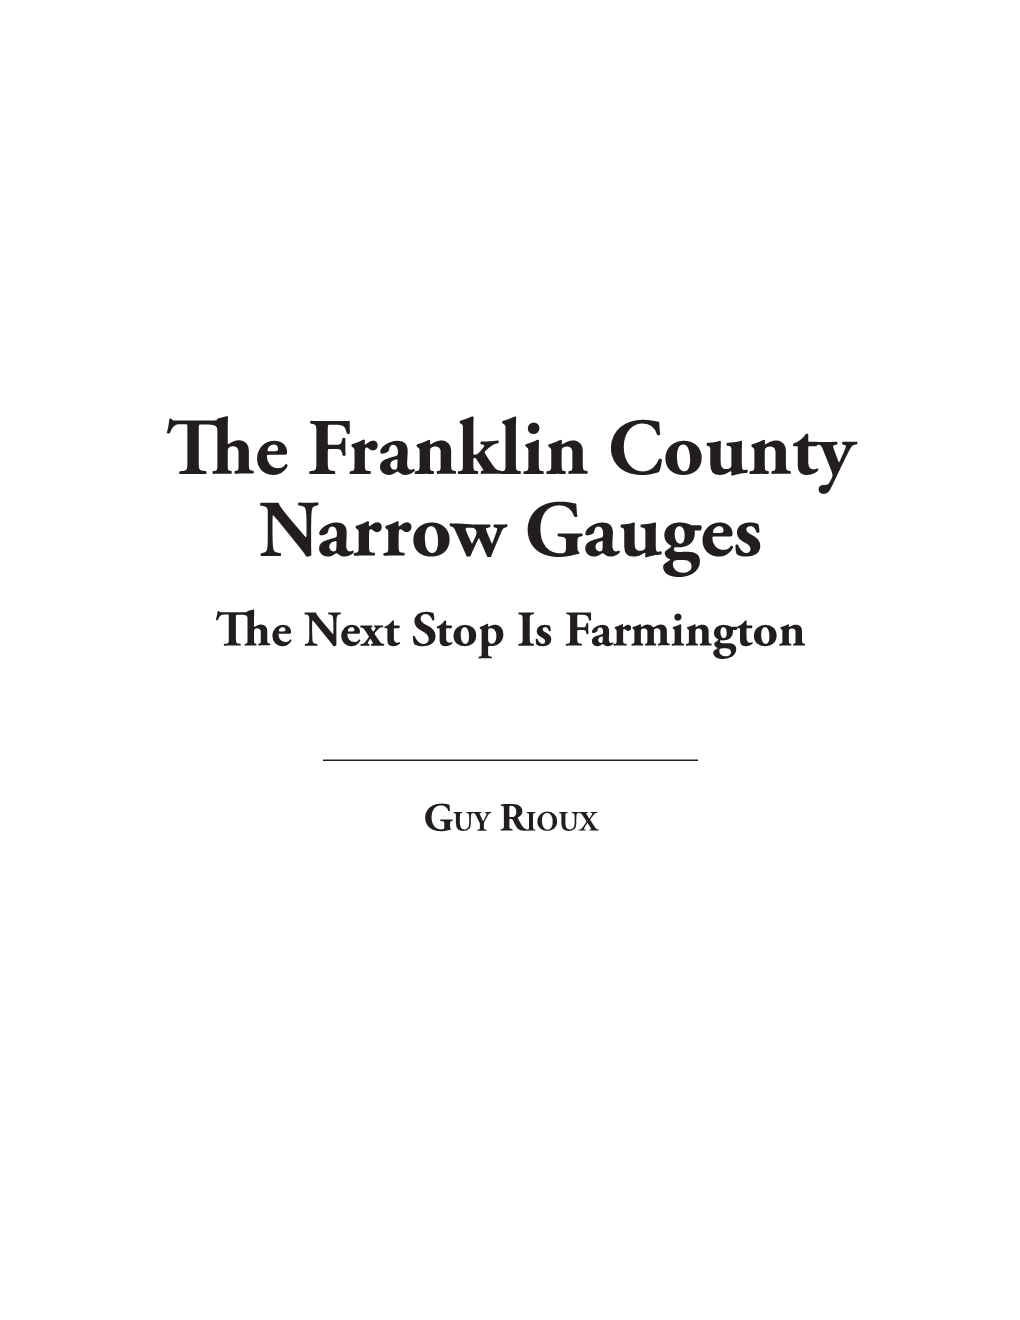 The Franklin County Narrow Gauges